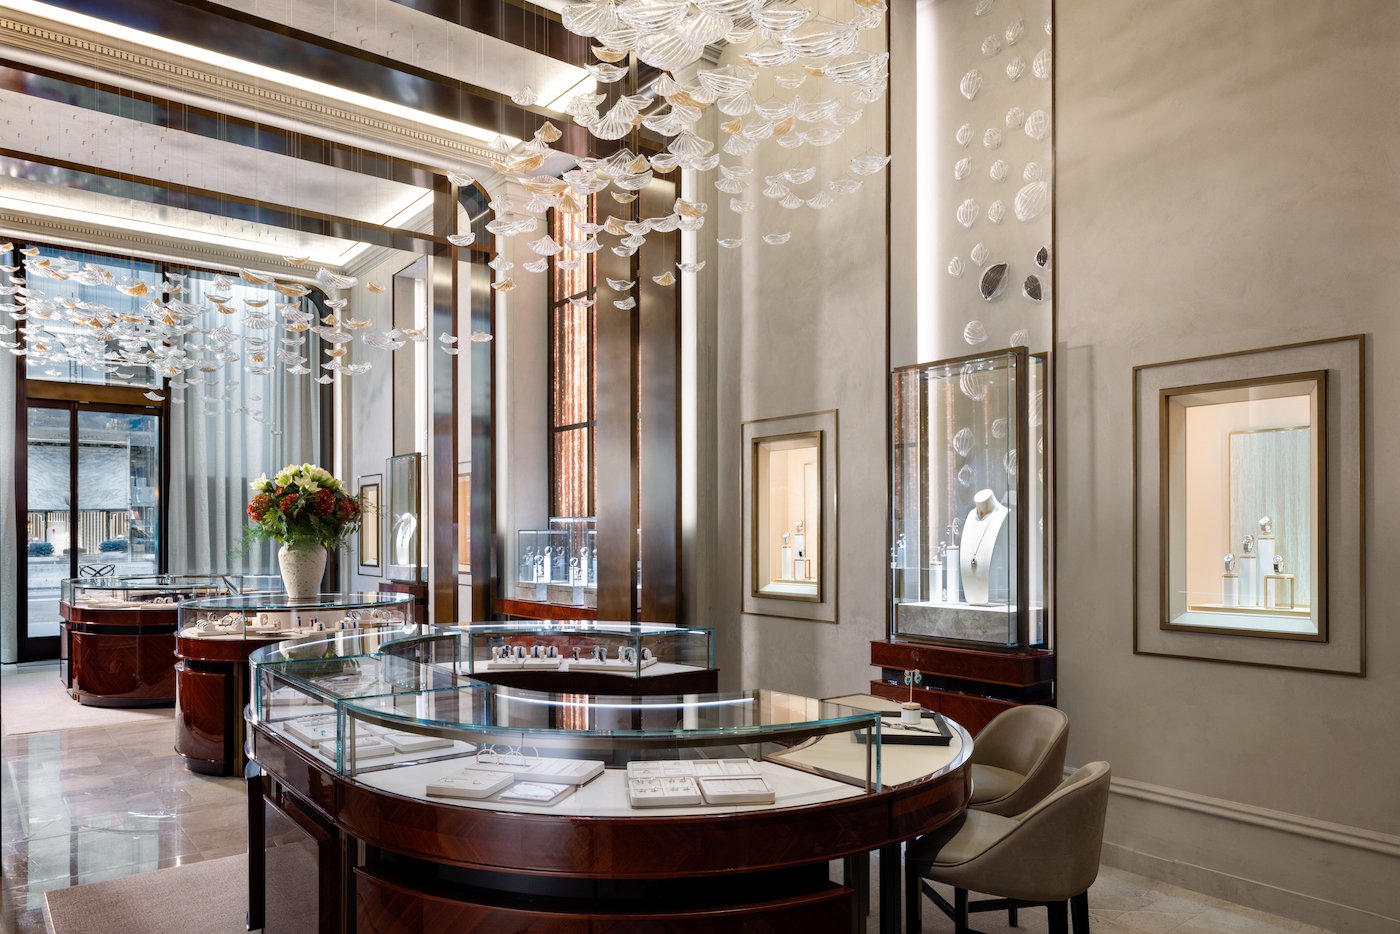 Chopard opens on New York's legendary Fifth Avenue